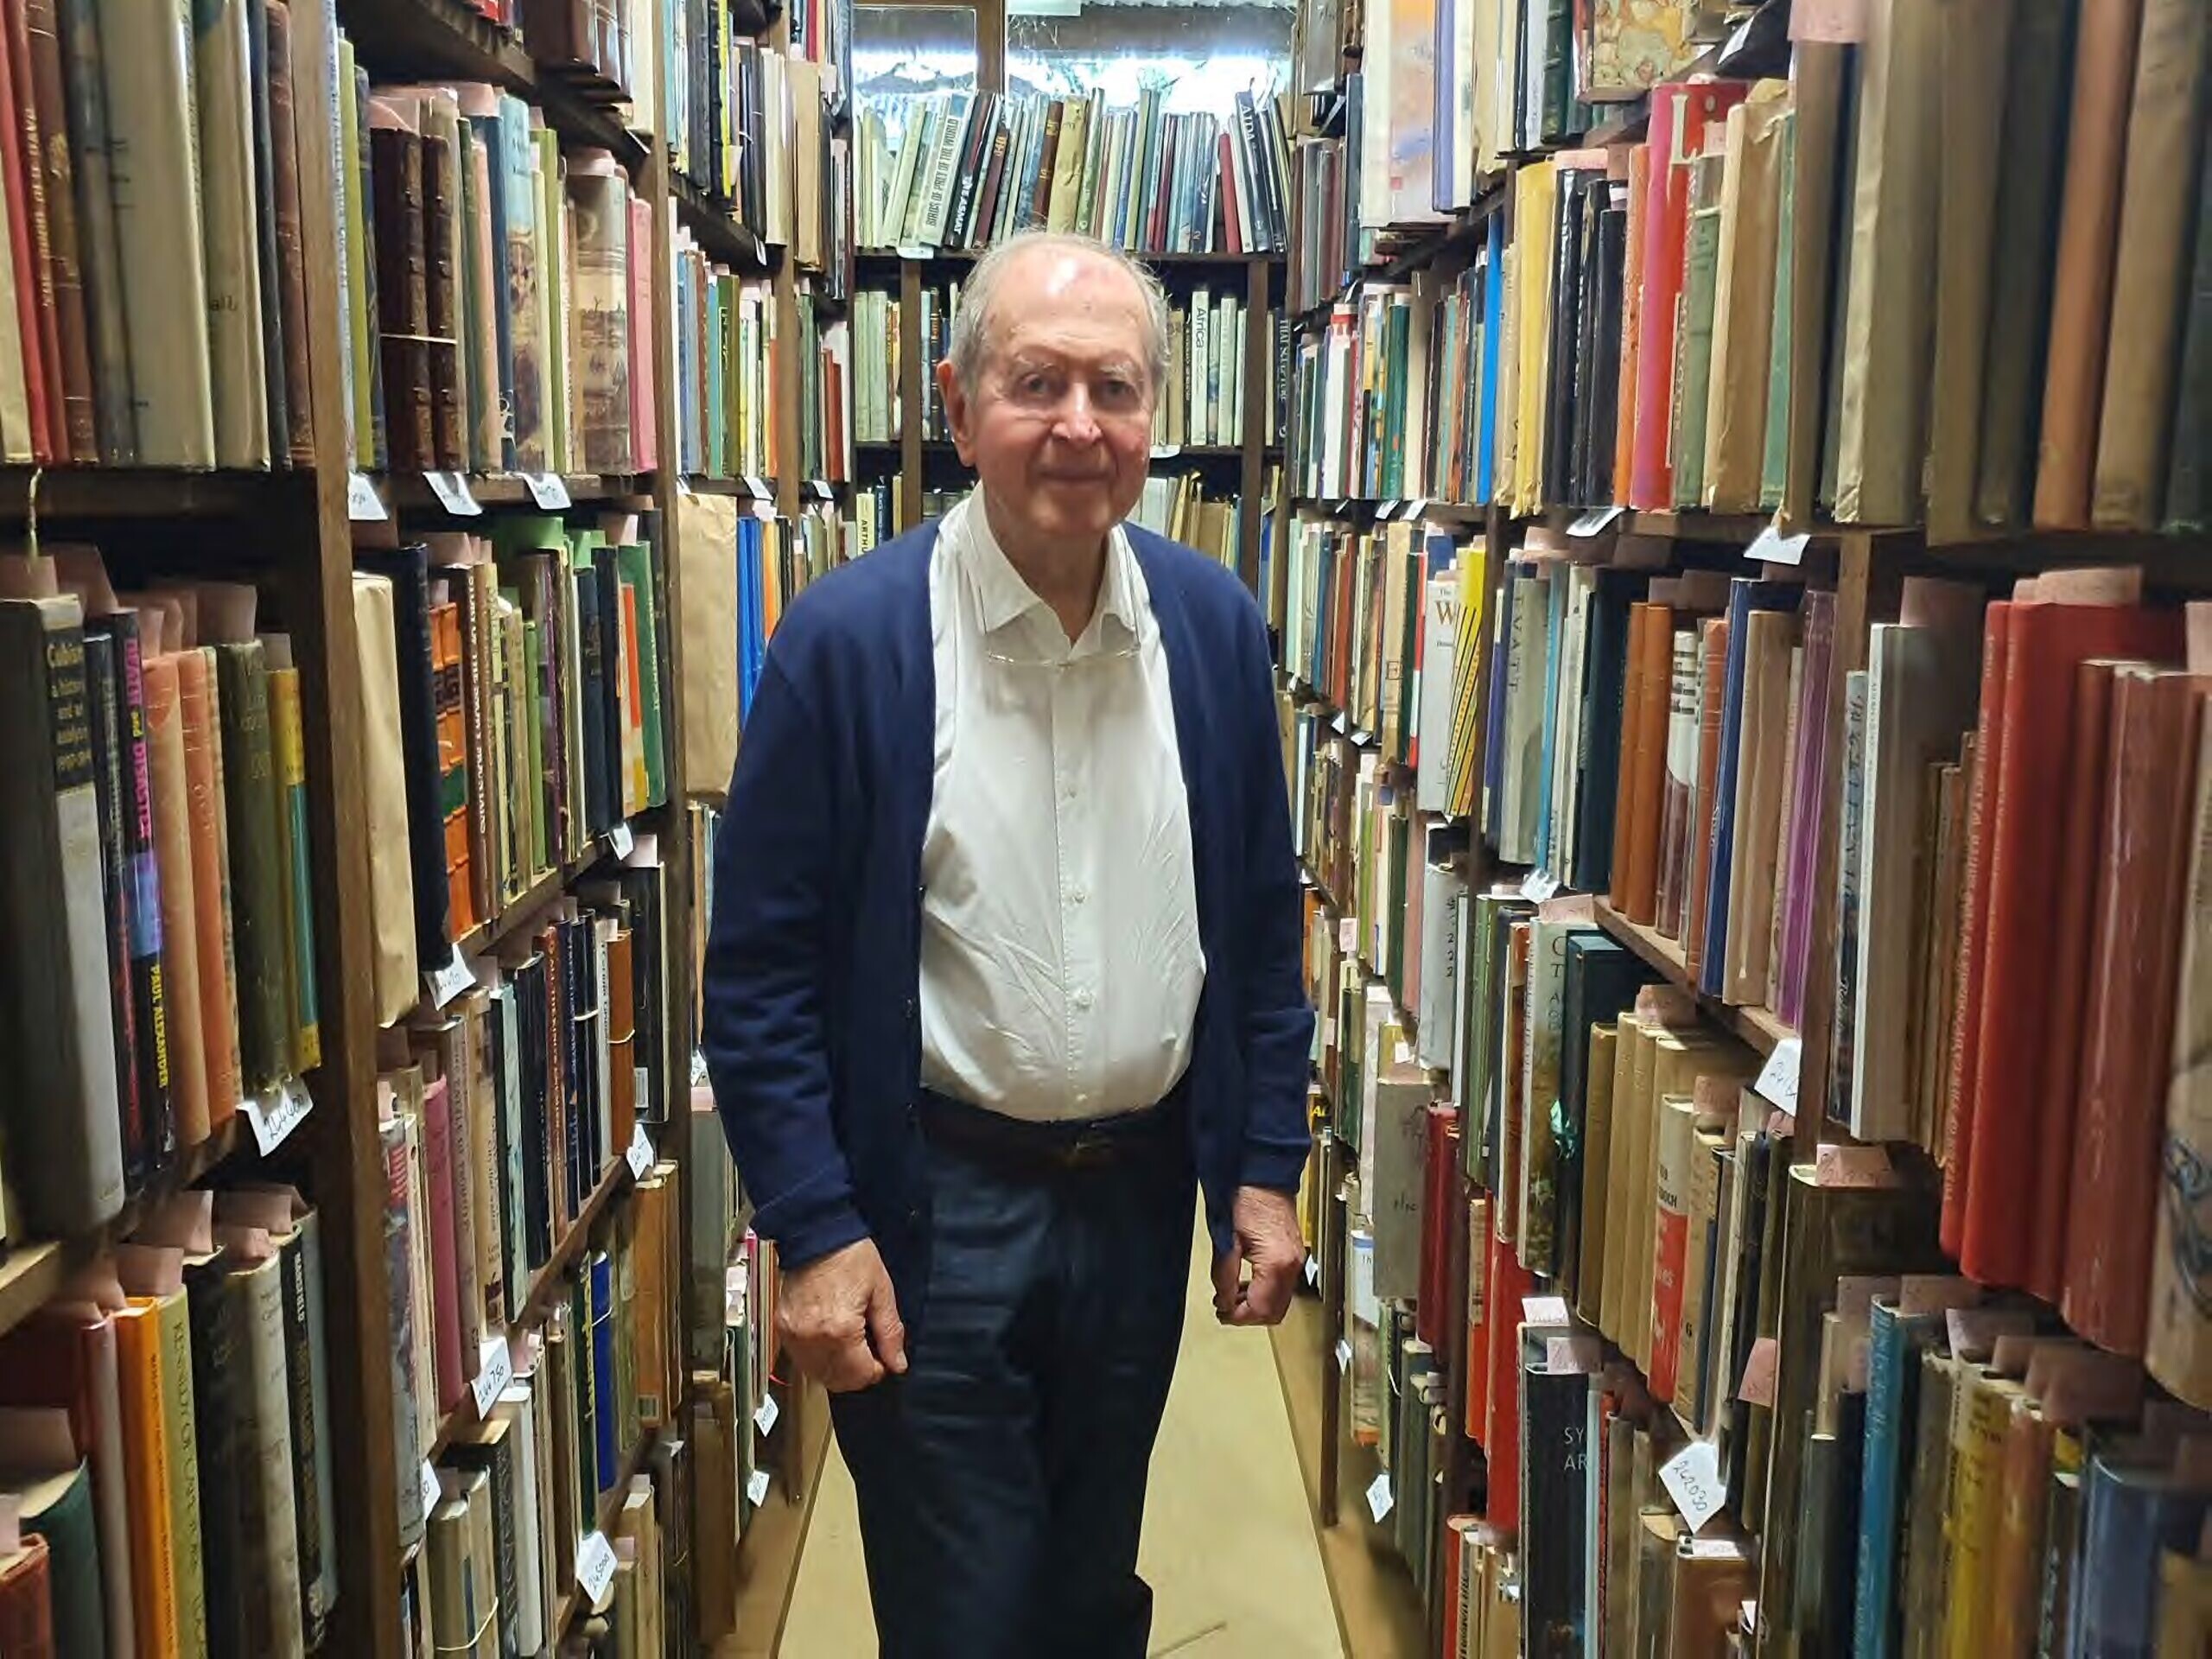 Berkelouw image in article about bookshops with Jewish history